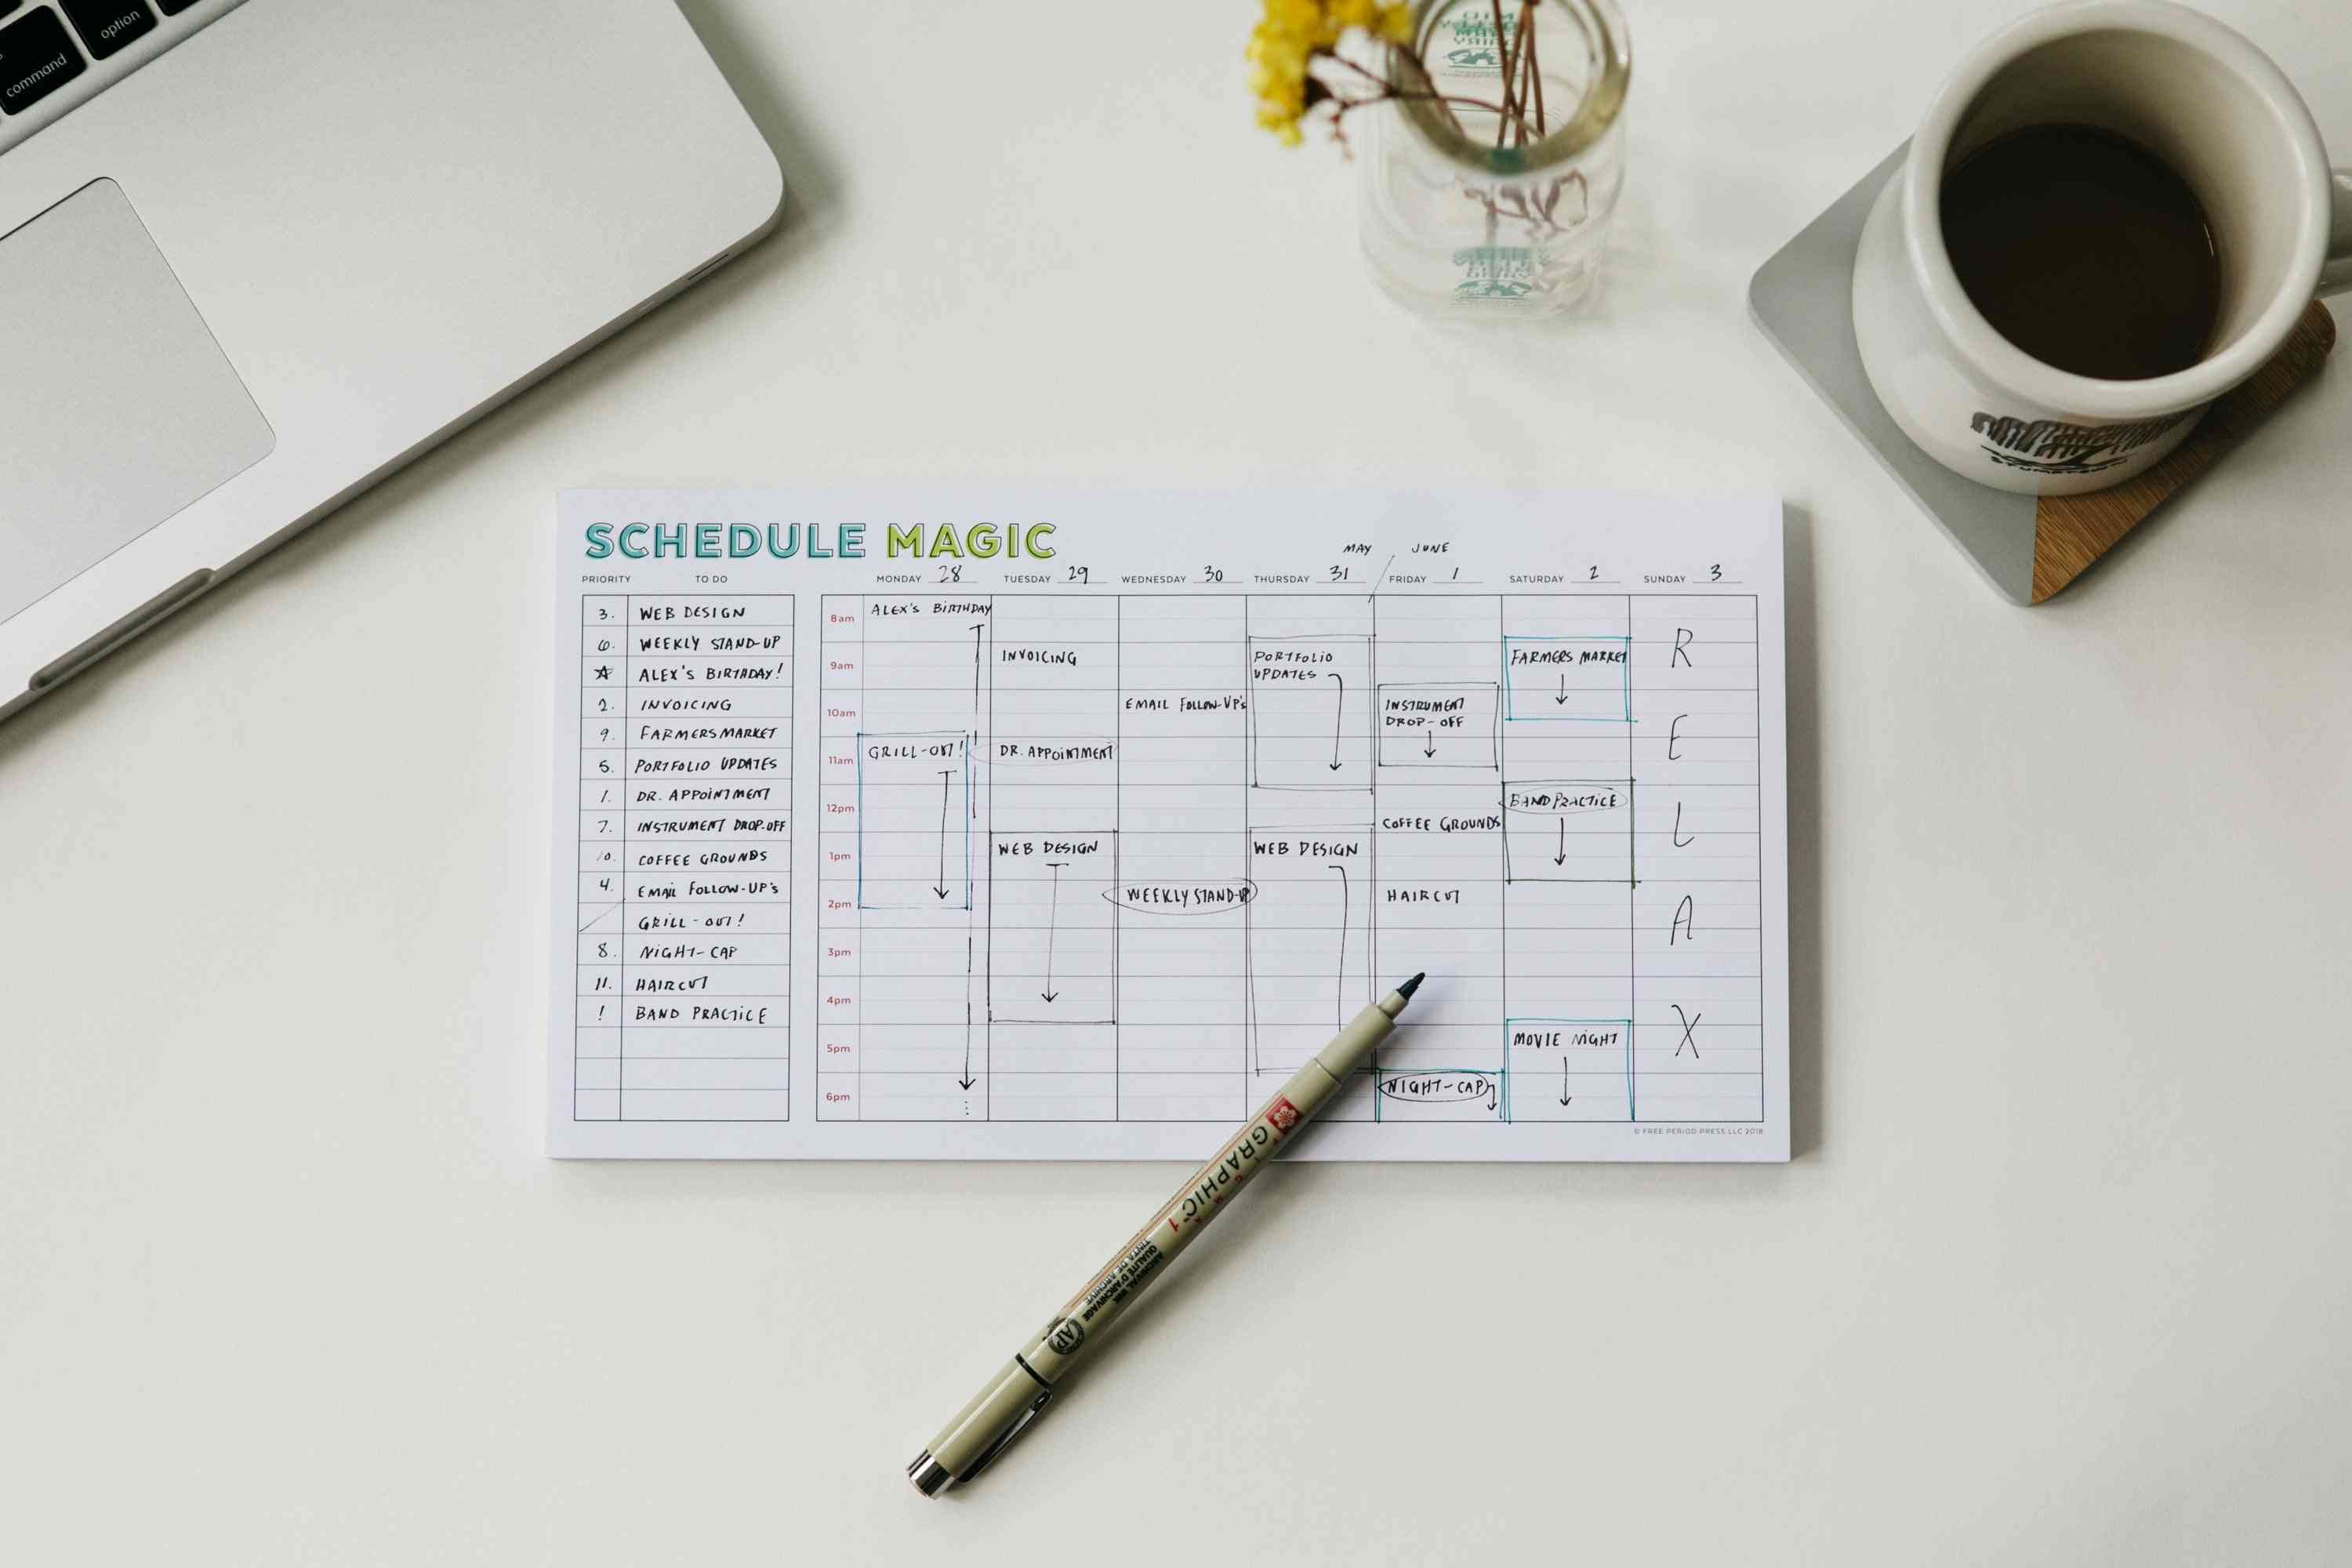 Weekly Schedule Magic To-do List - Notepad